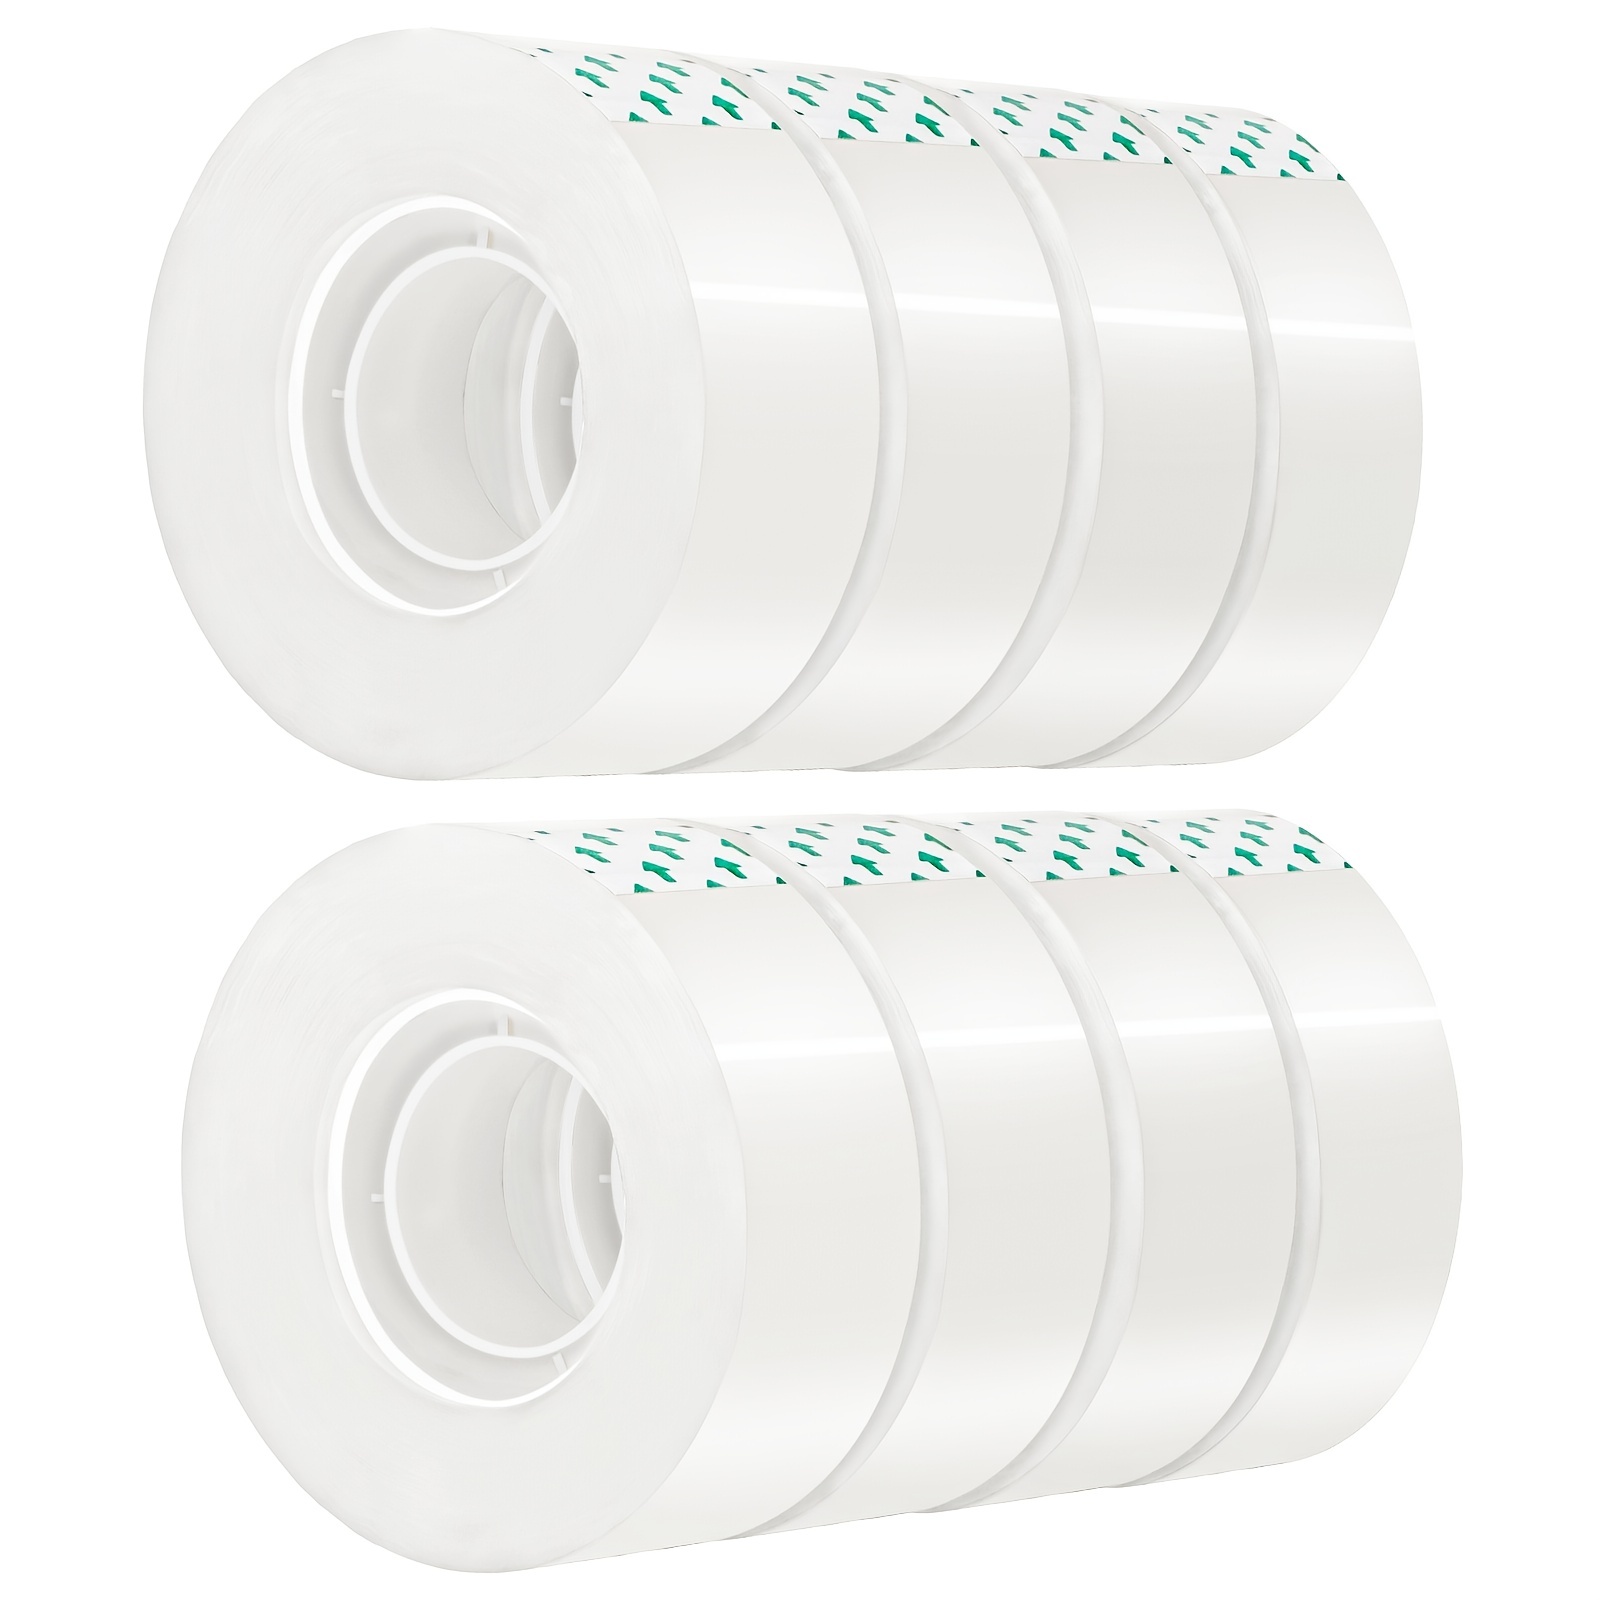 16 Rolls Transparent Tape Refills, 3/4-Inch x 1000 inch Clear Tape, 1 16  ROll